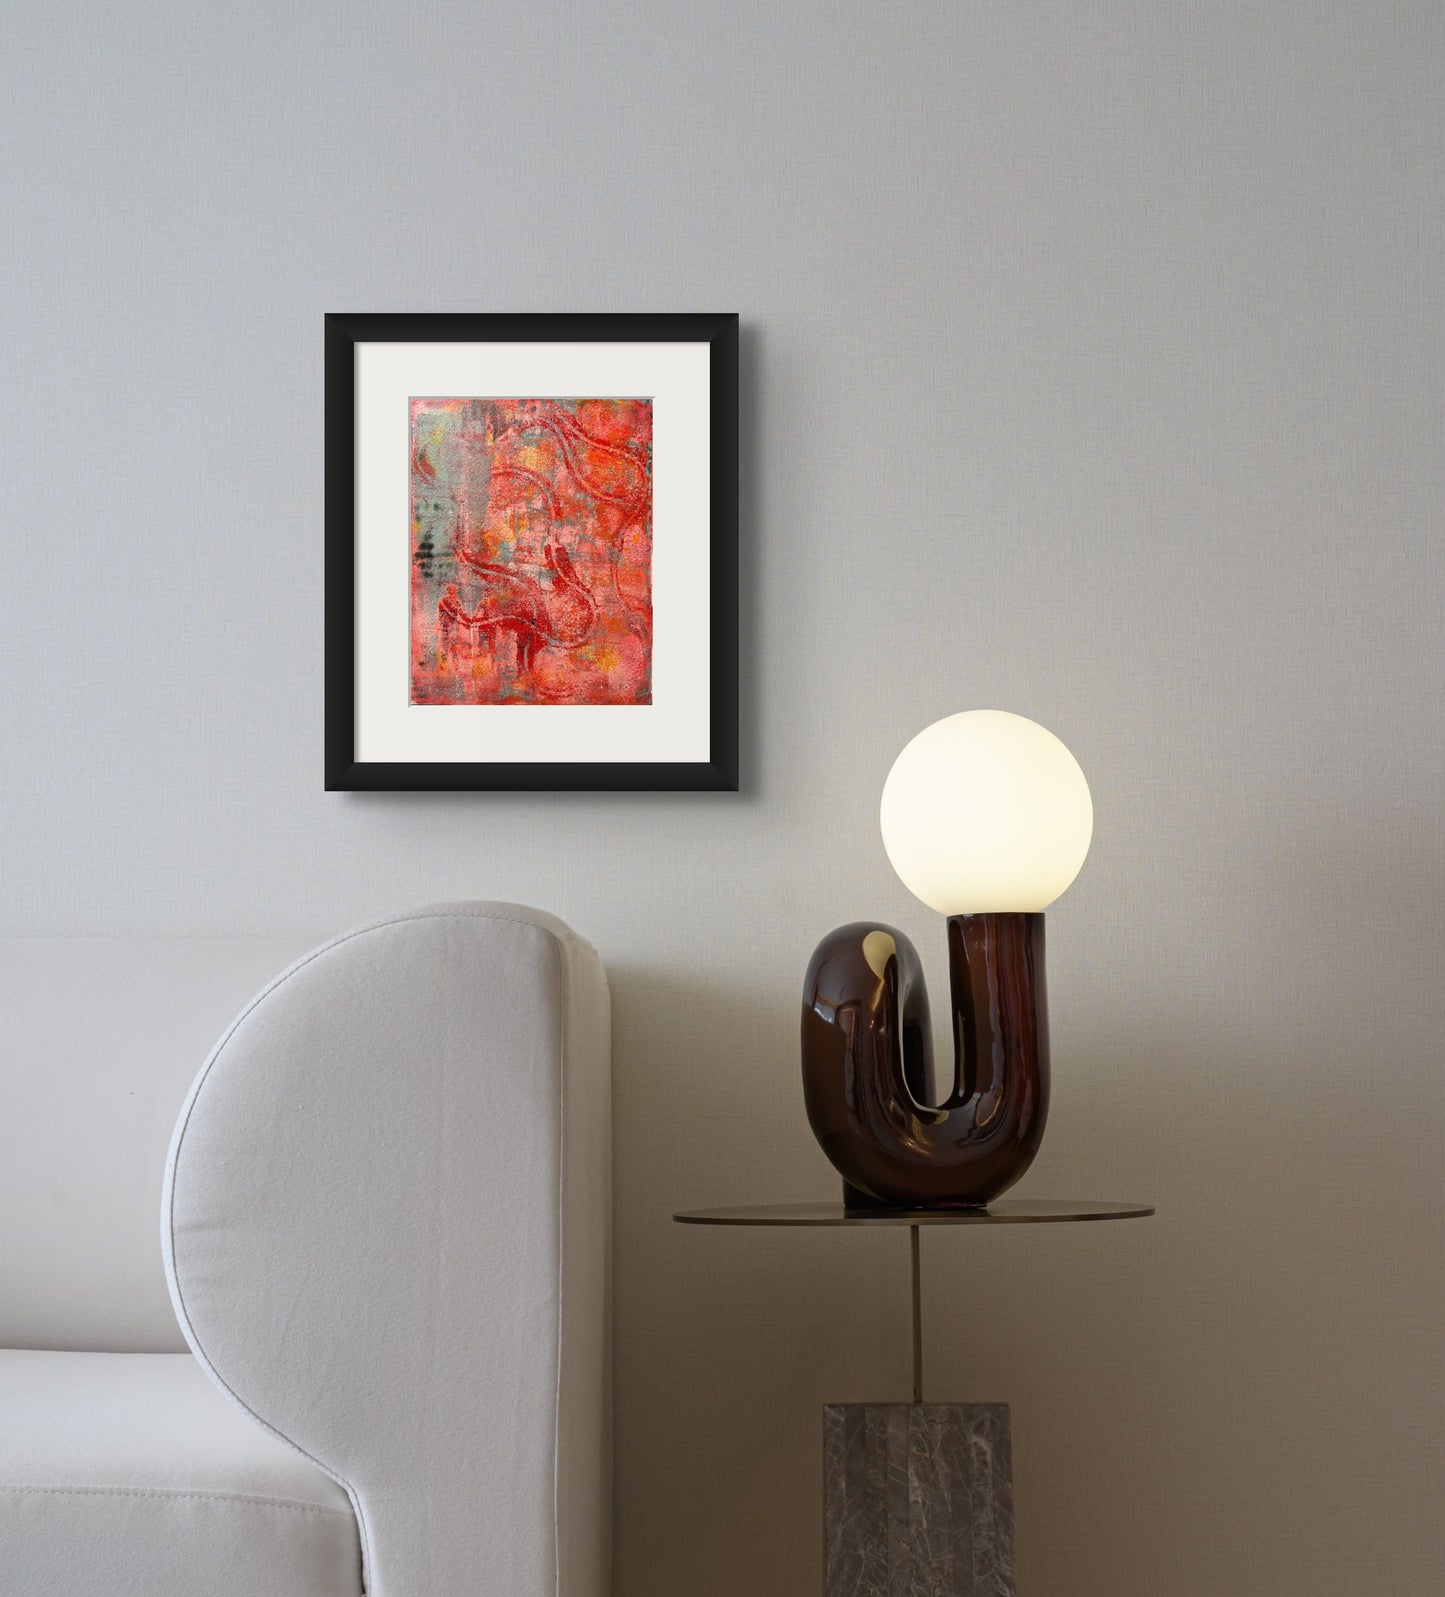 Colorful acrylic abstract print using reds, oranges, and pinks; artist Bob Hogue; shown with white frame in situ